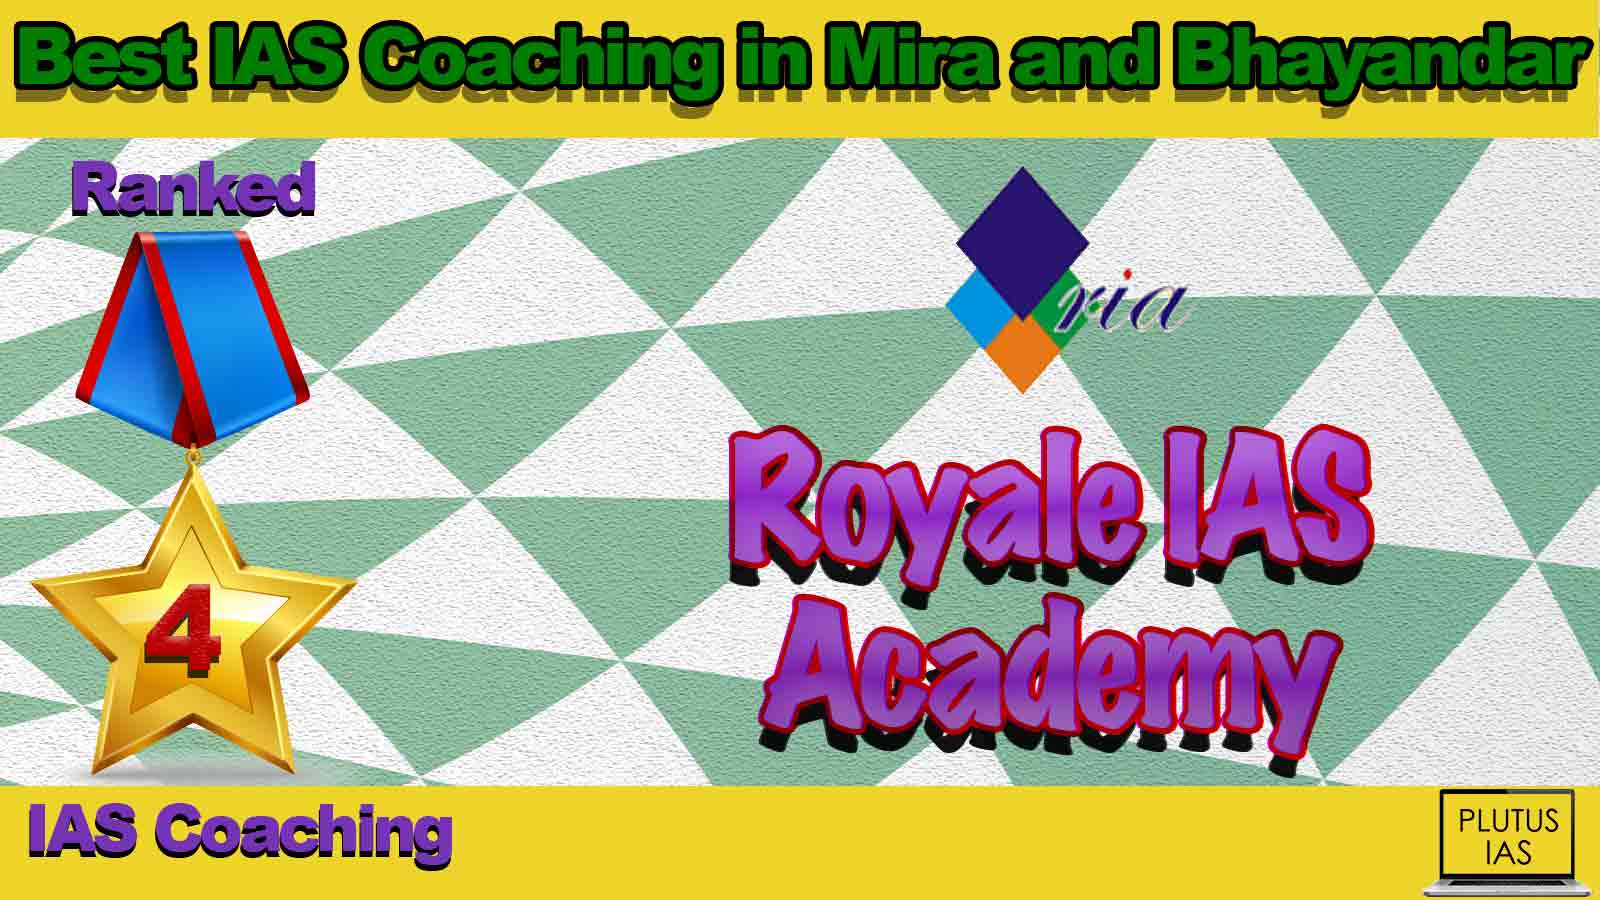 Best IAS Coaching in Mira and Bhayandar